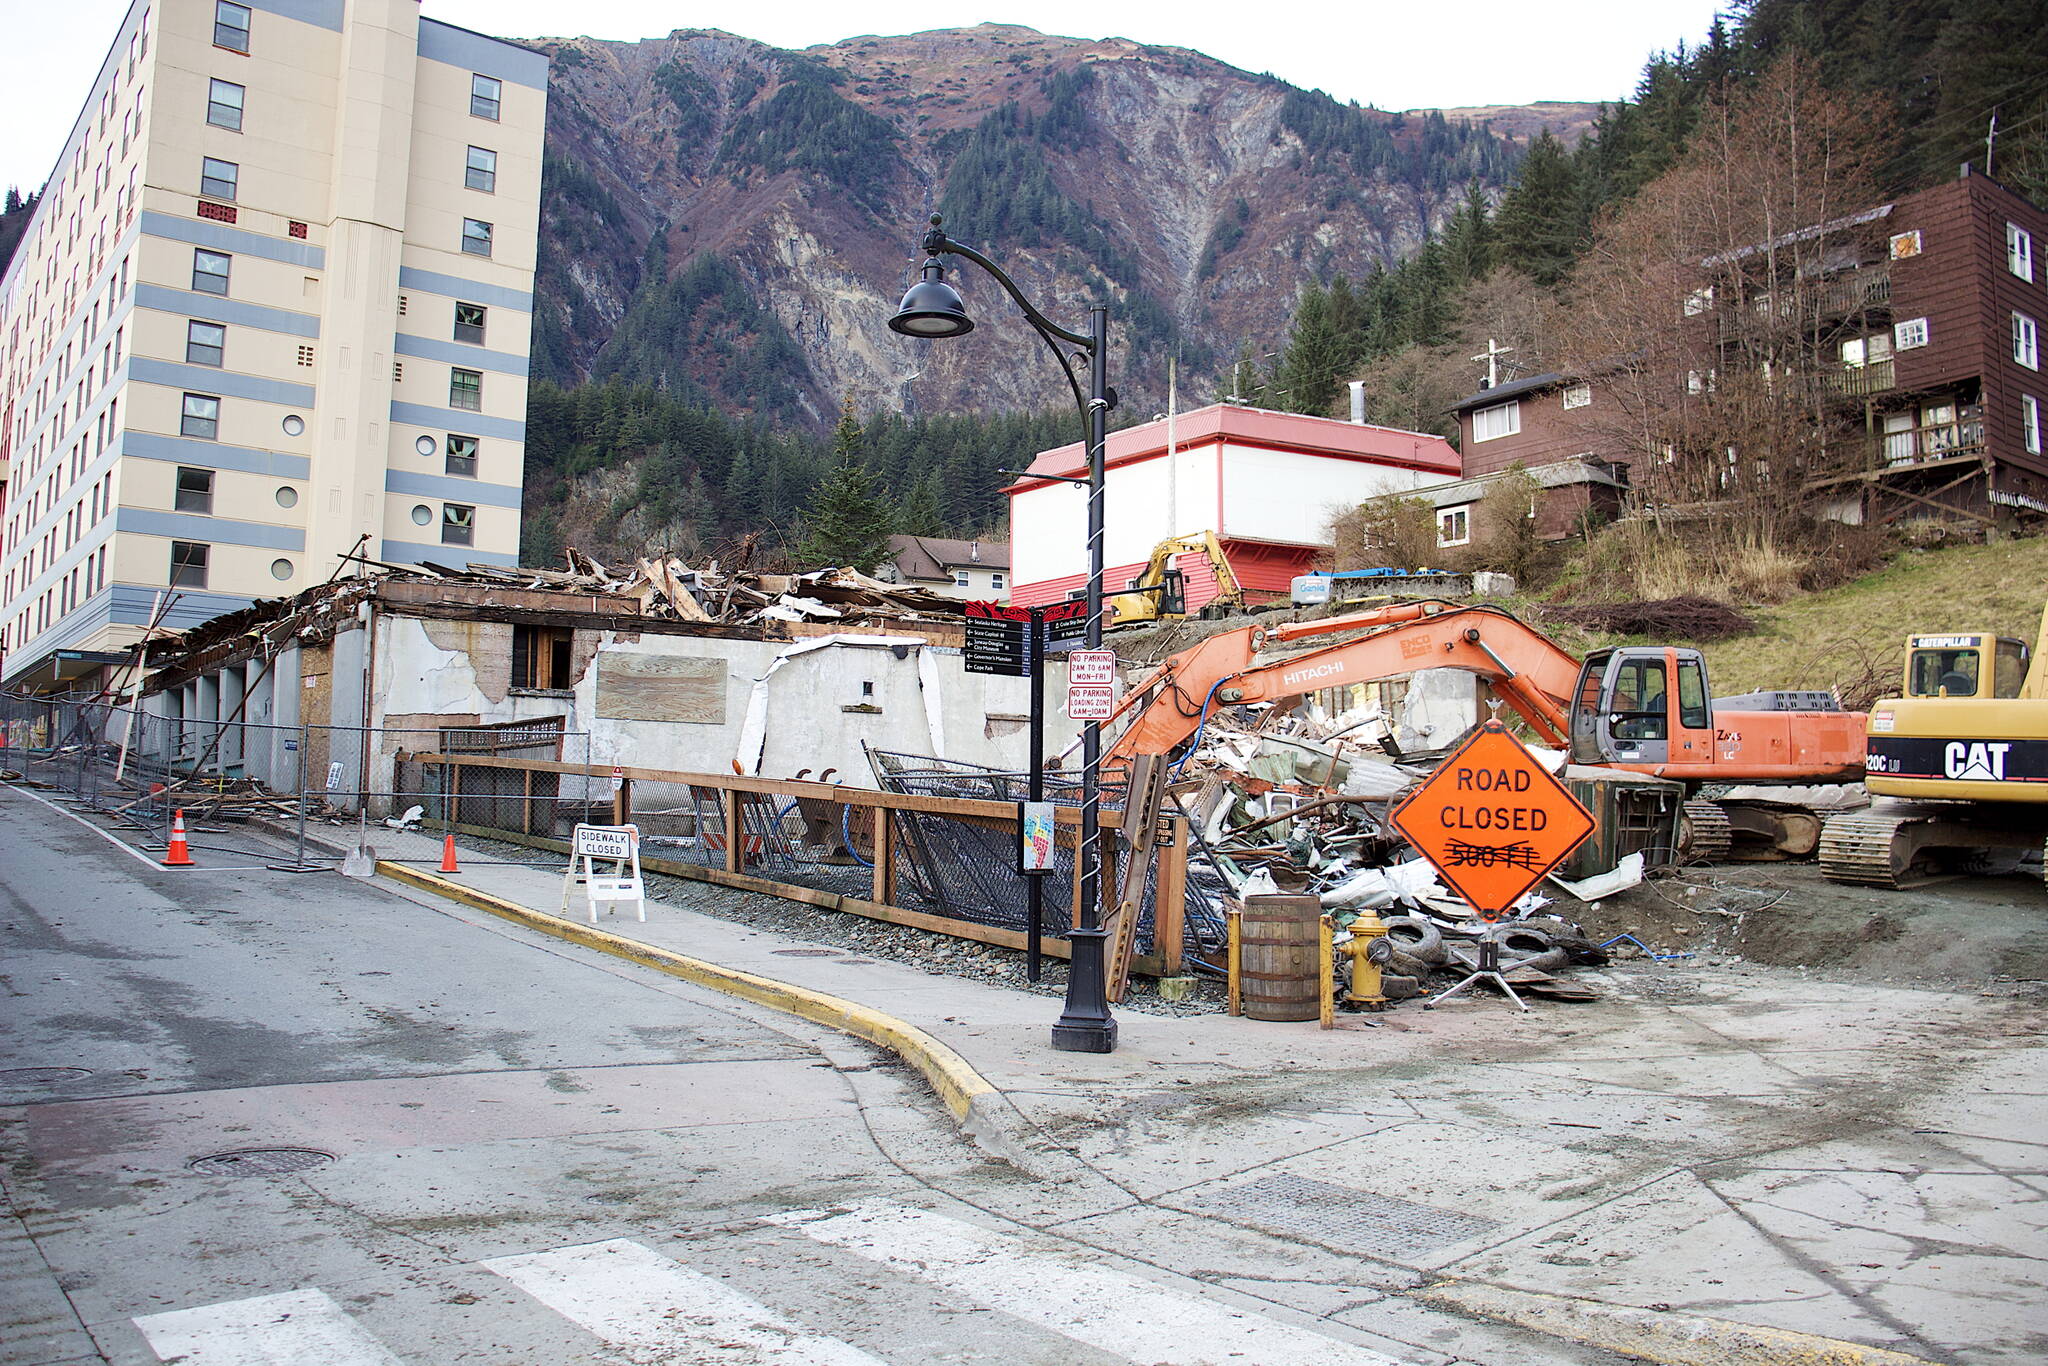 Downtown Juneau properties owned by David McCasland, including the site of the former Elks Lodge that was demolished this week, are the proposed site for a permanent commercial food operation and housing, according to city documents. (Mark Sabbatini / Juneau Empire)